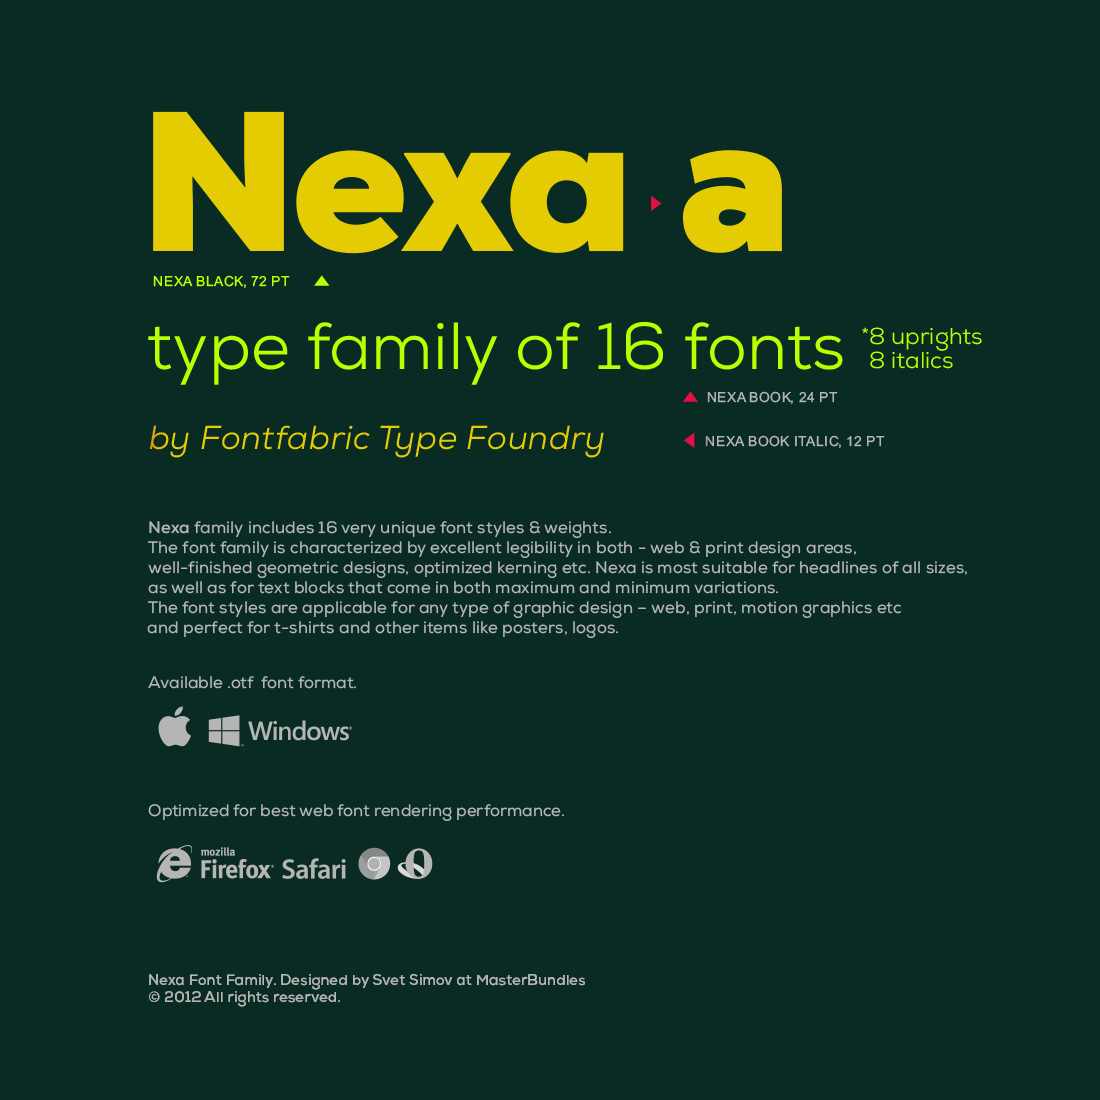 Nexa Font Family 16x Only $9 cover image.